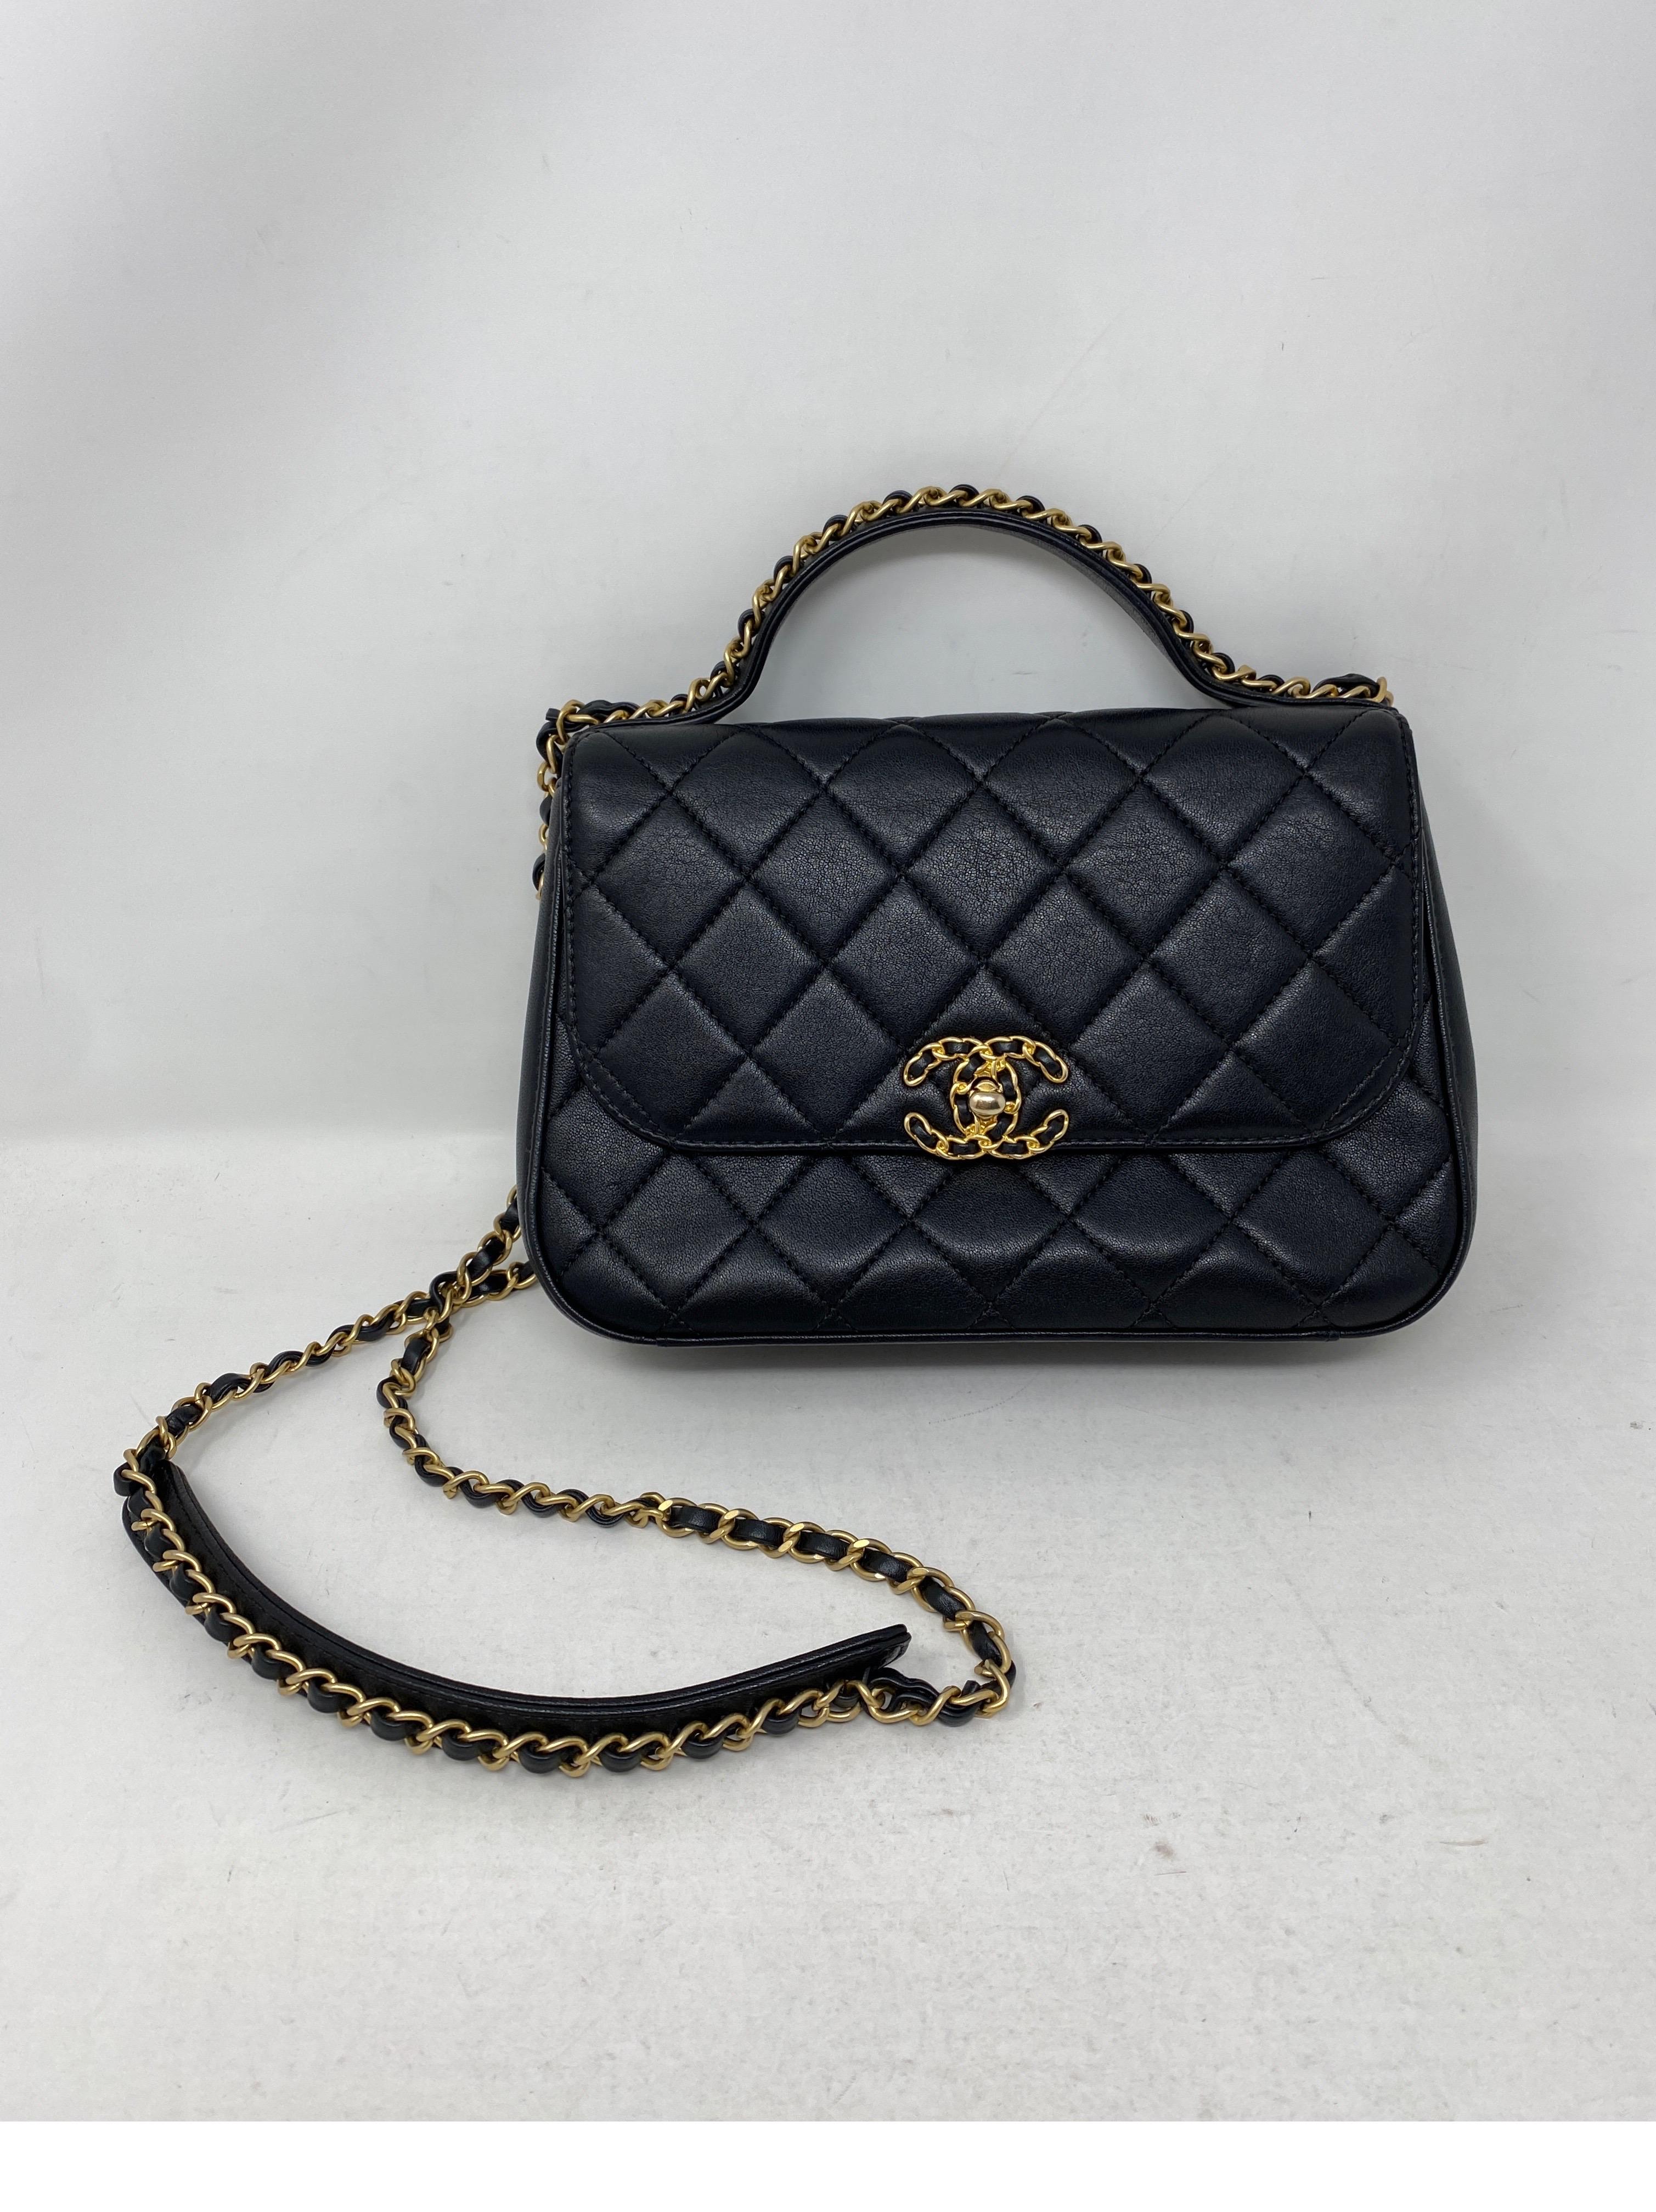 Chanel Top Handle Black Chain Bag. Crossbody bag. Beautiful black leather with gold chain details on top handle and CC lock closure. Excellent like new condition. Includes authenticity card. Guaranteed authentic. 